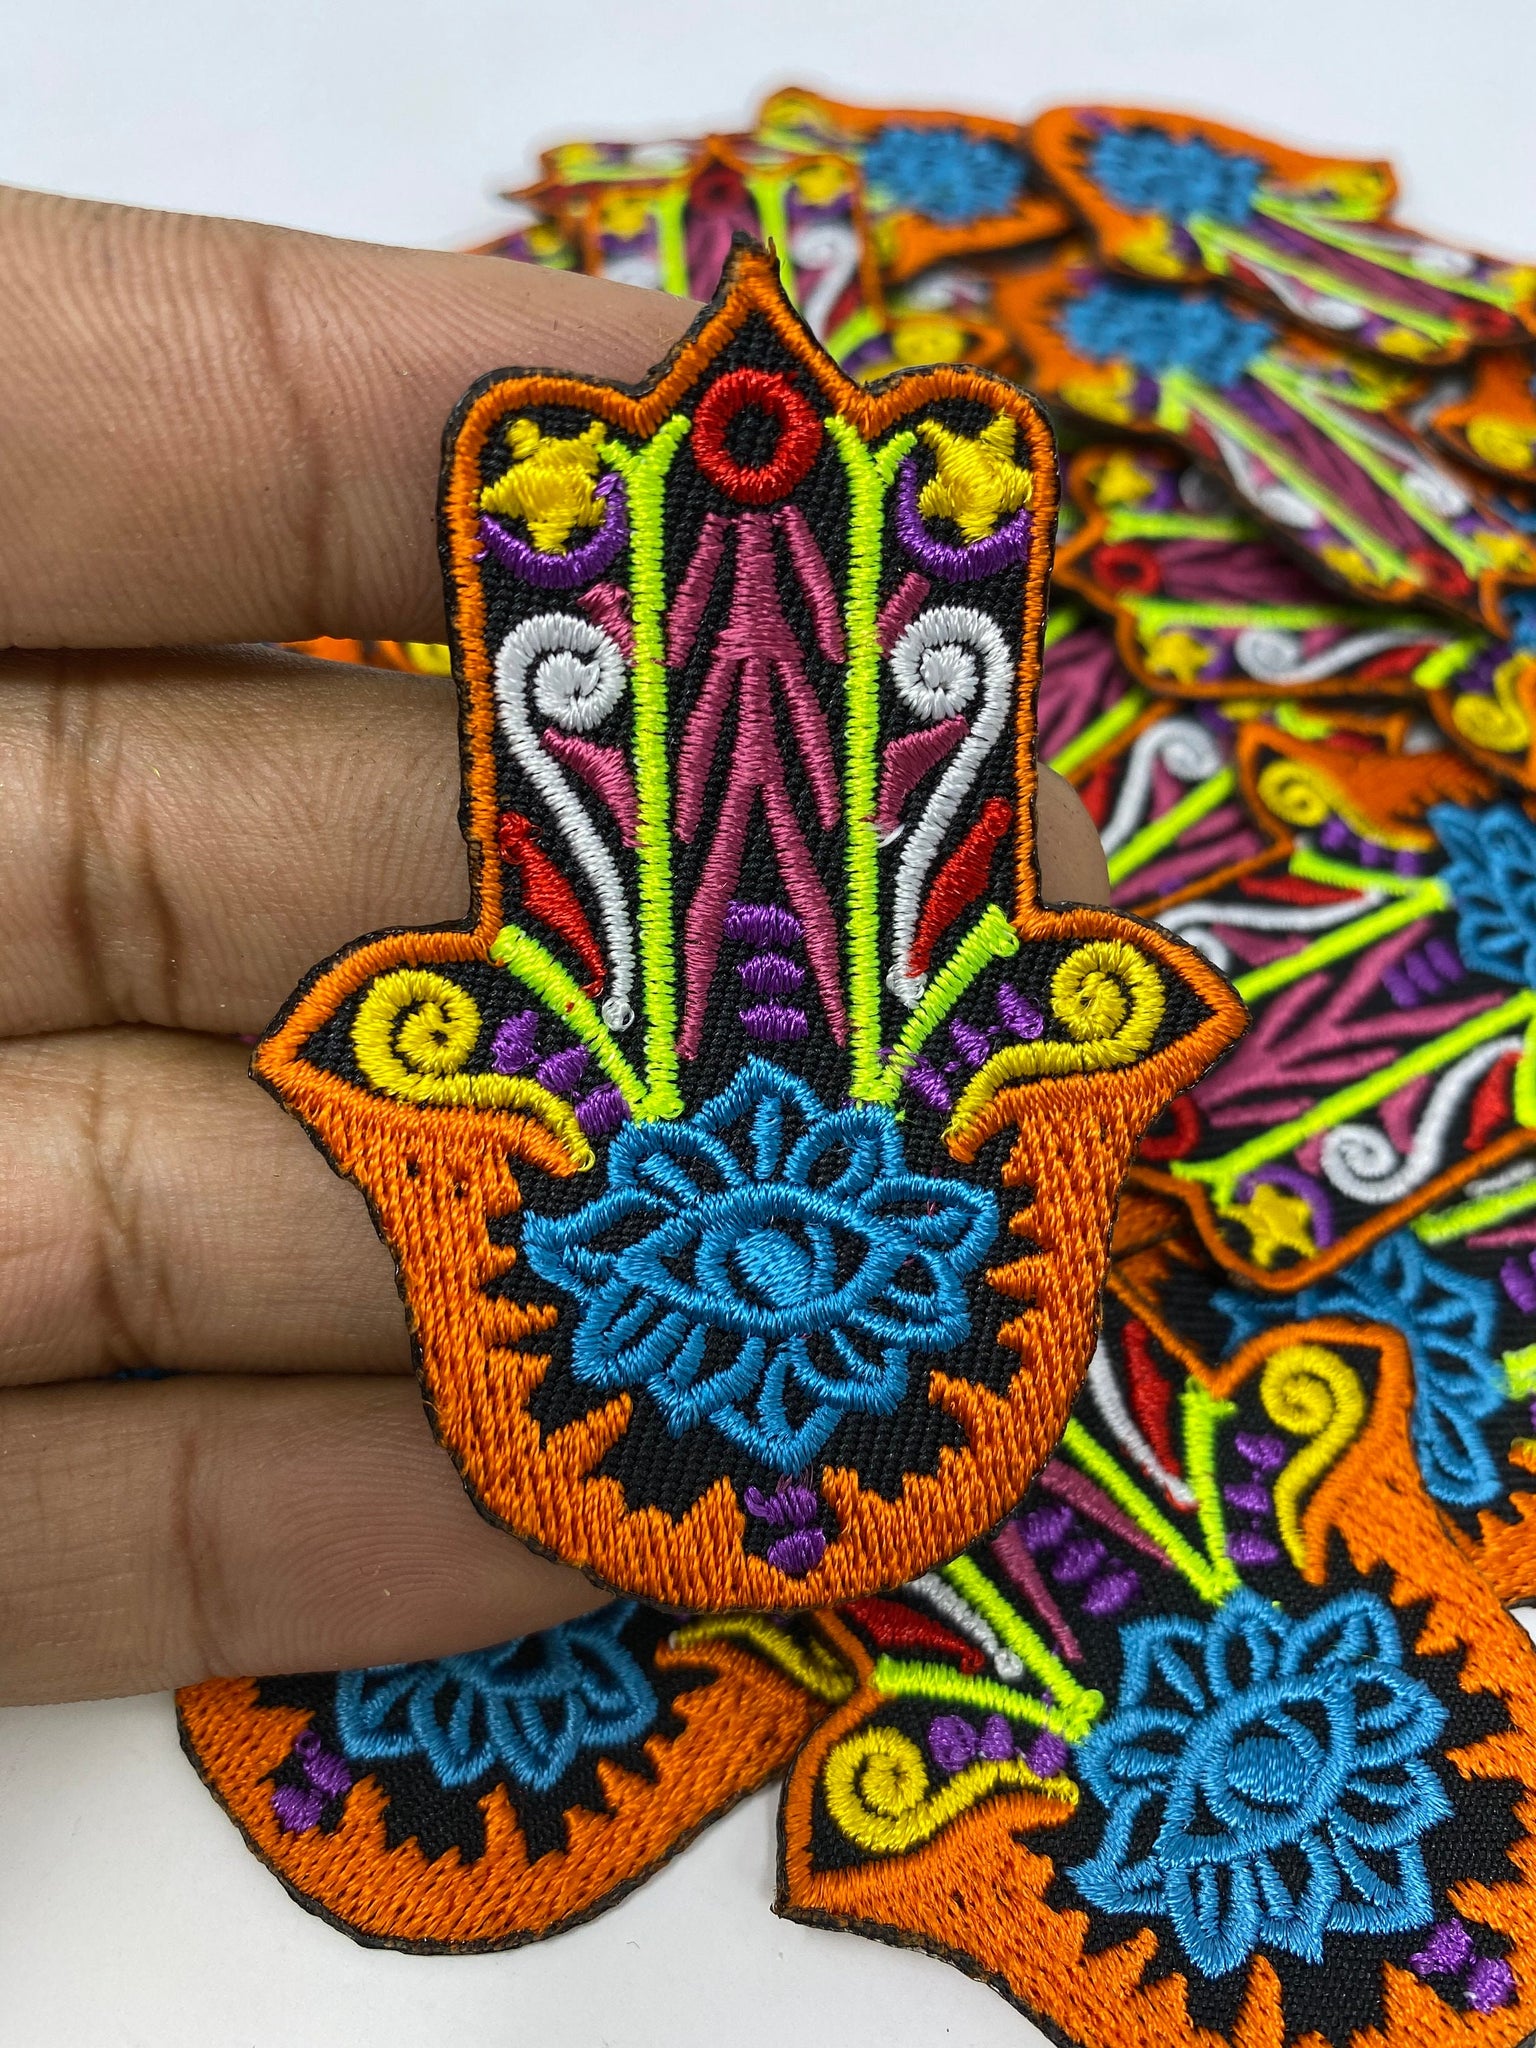 New Arrival, " 2pc Mini Hamsa Eye Patch, Iron-on Patch, Colorful, Cool Bling Patch, DIY Applique; Vintage Patch, Size 2.5"